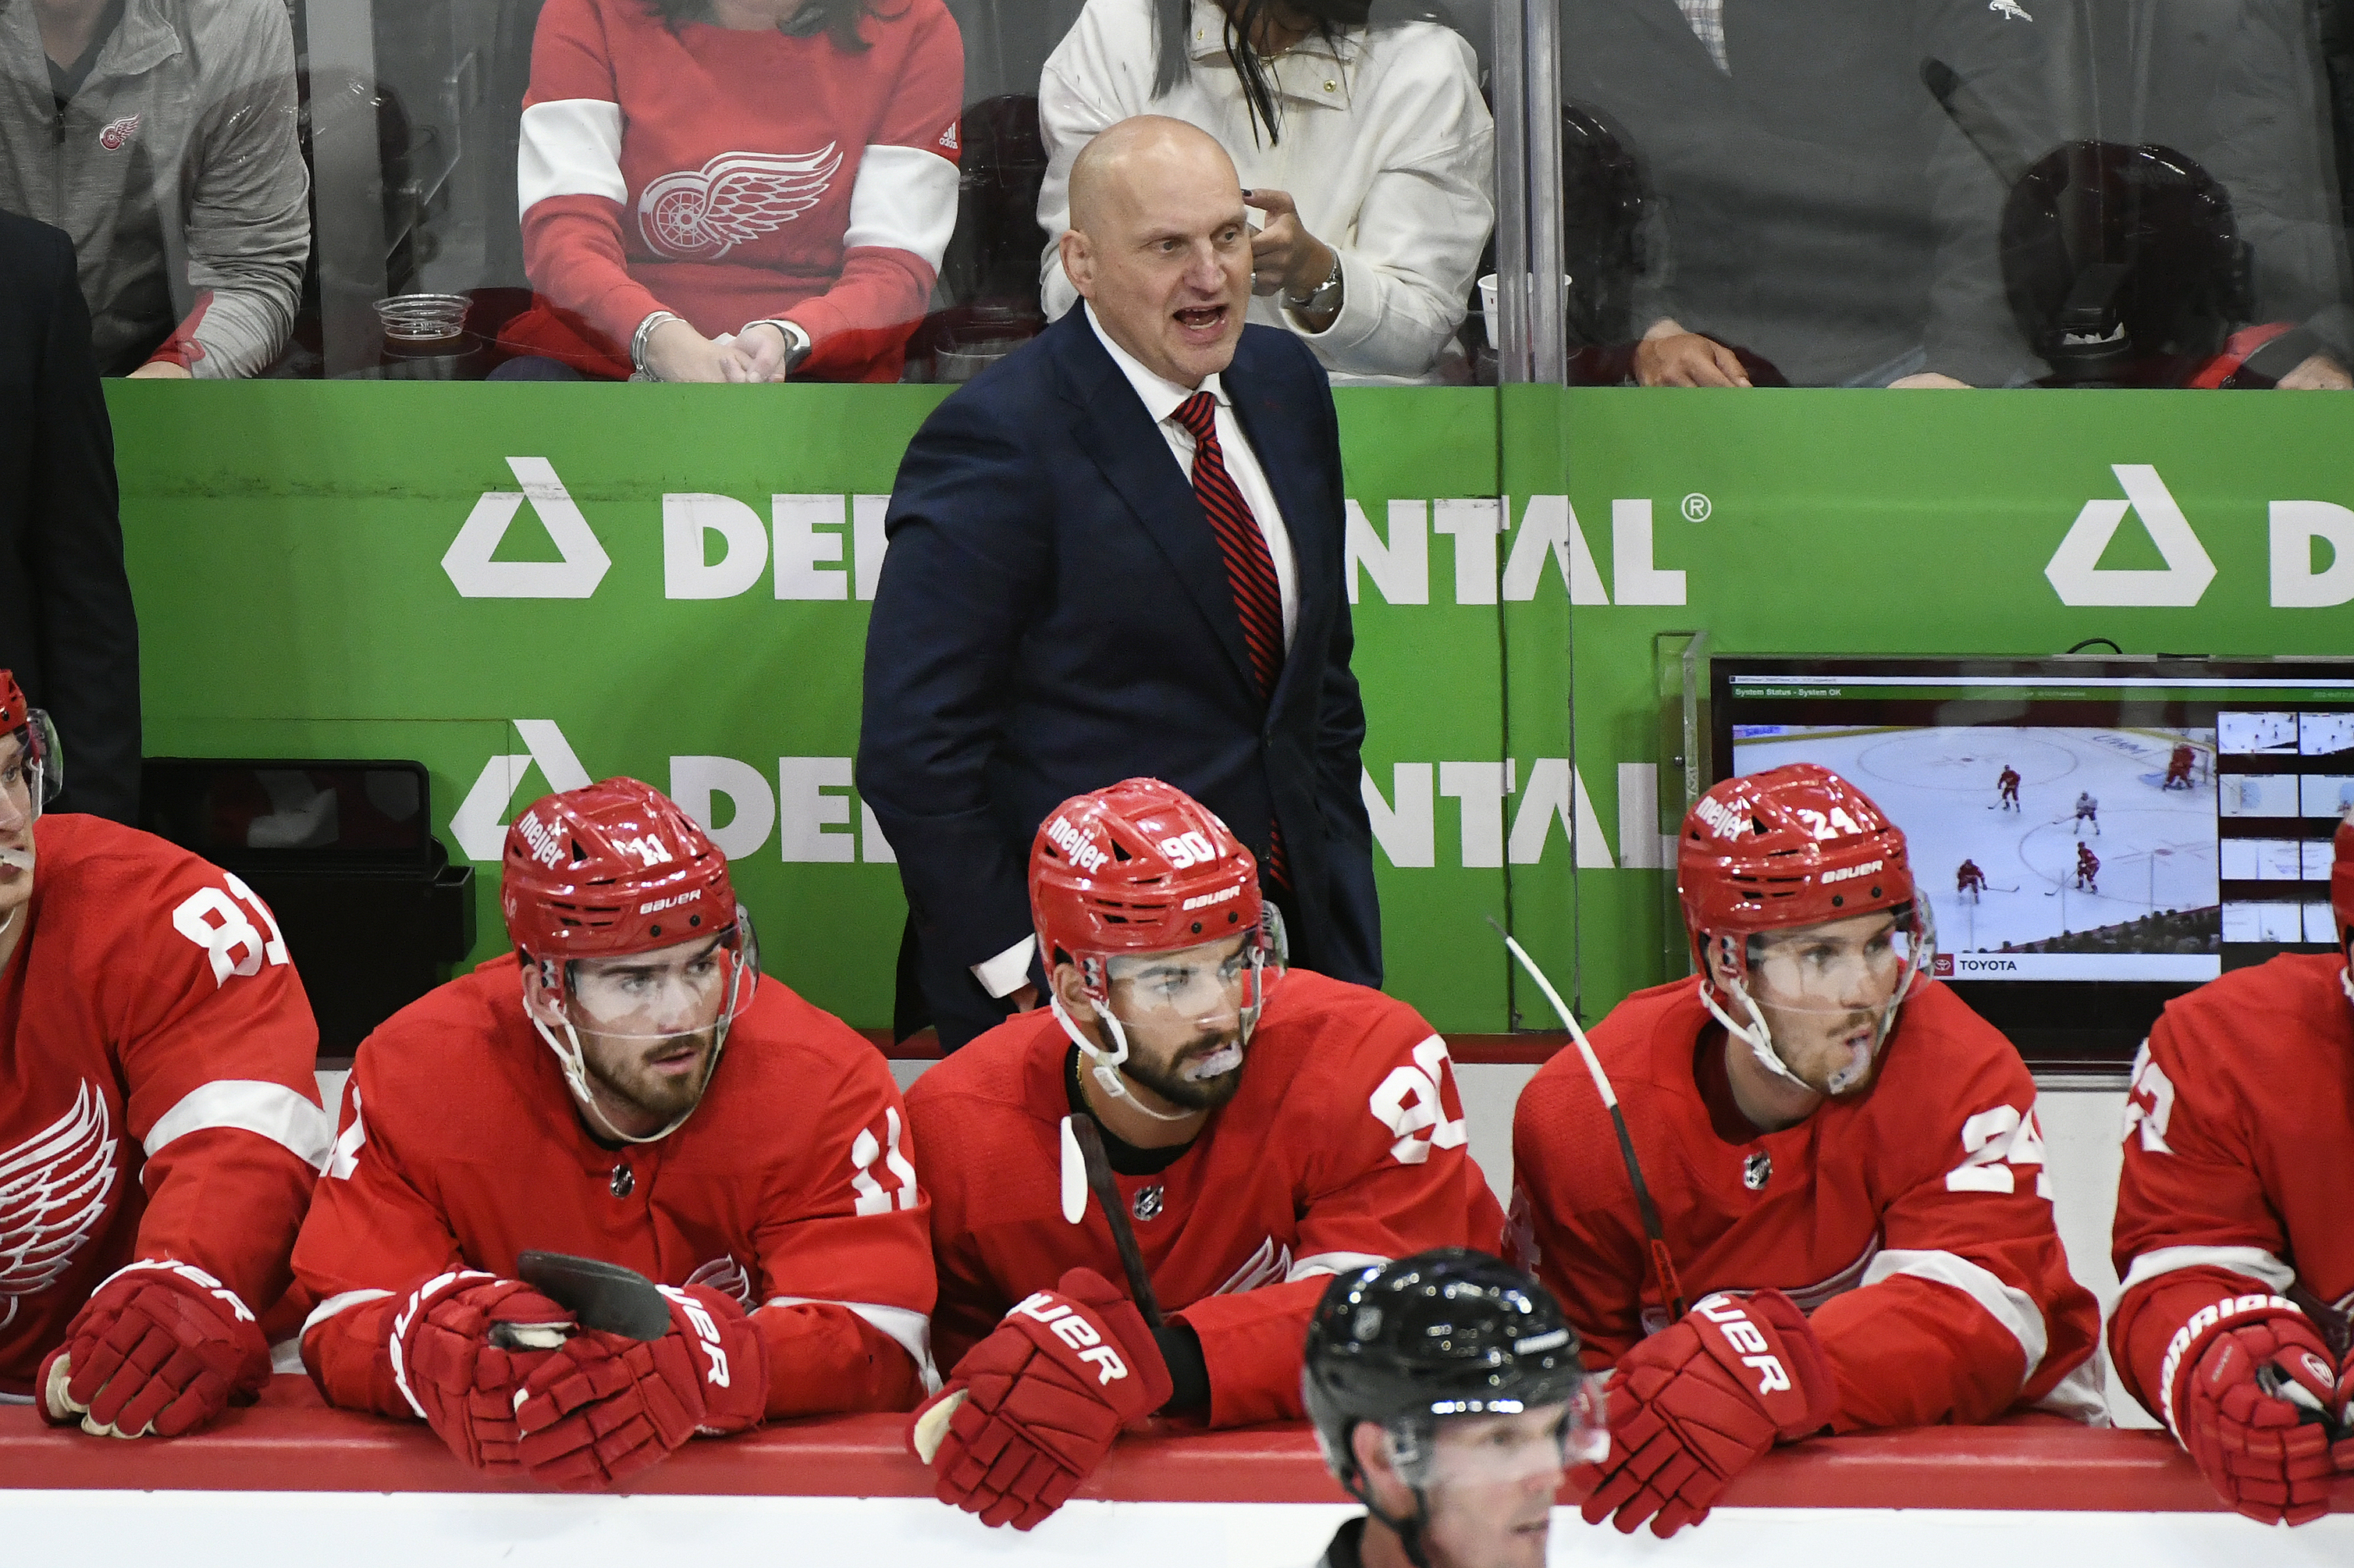 Detroit Red Wings' projected line combinations for 2023/24 NHL season